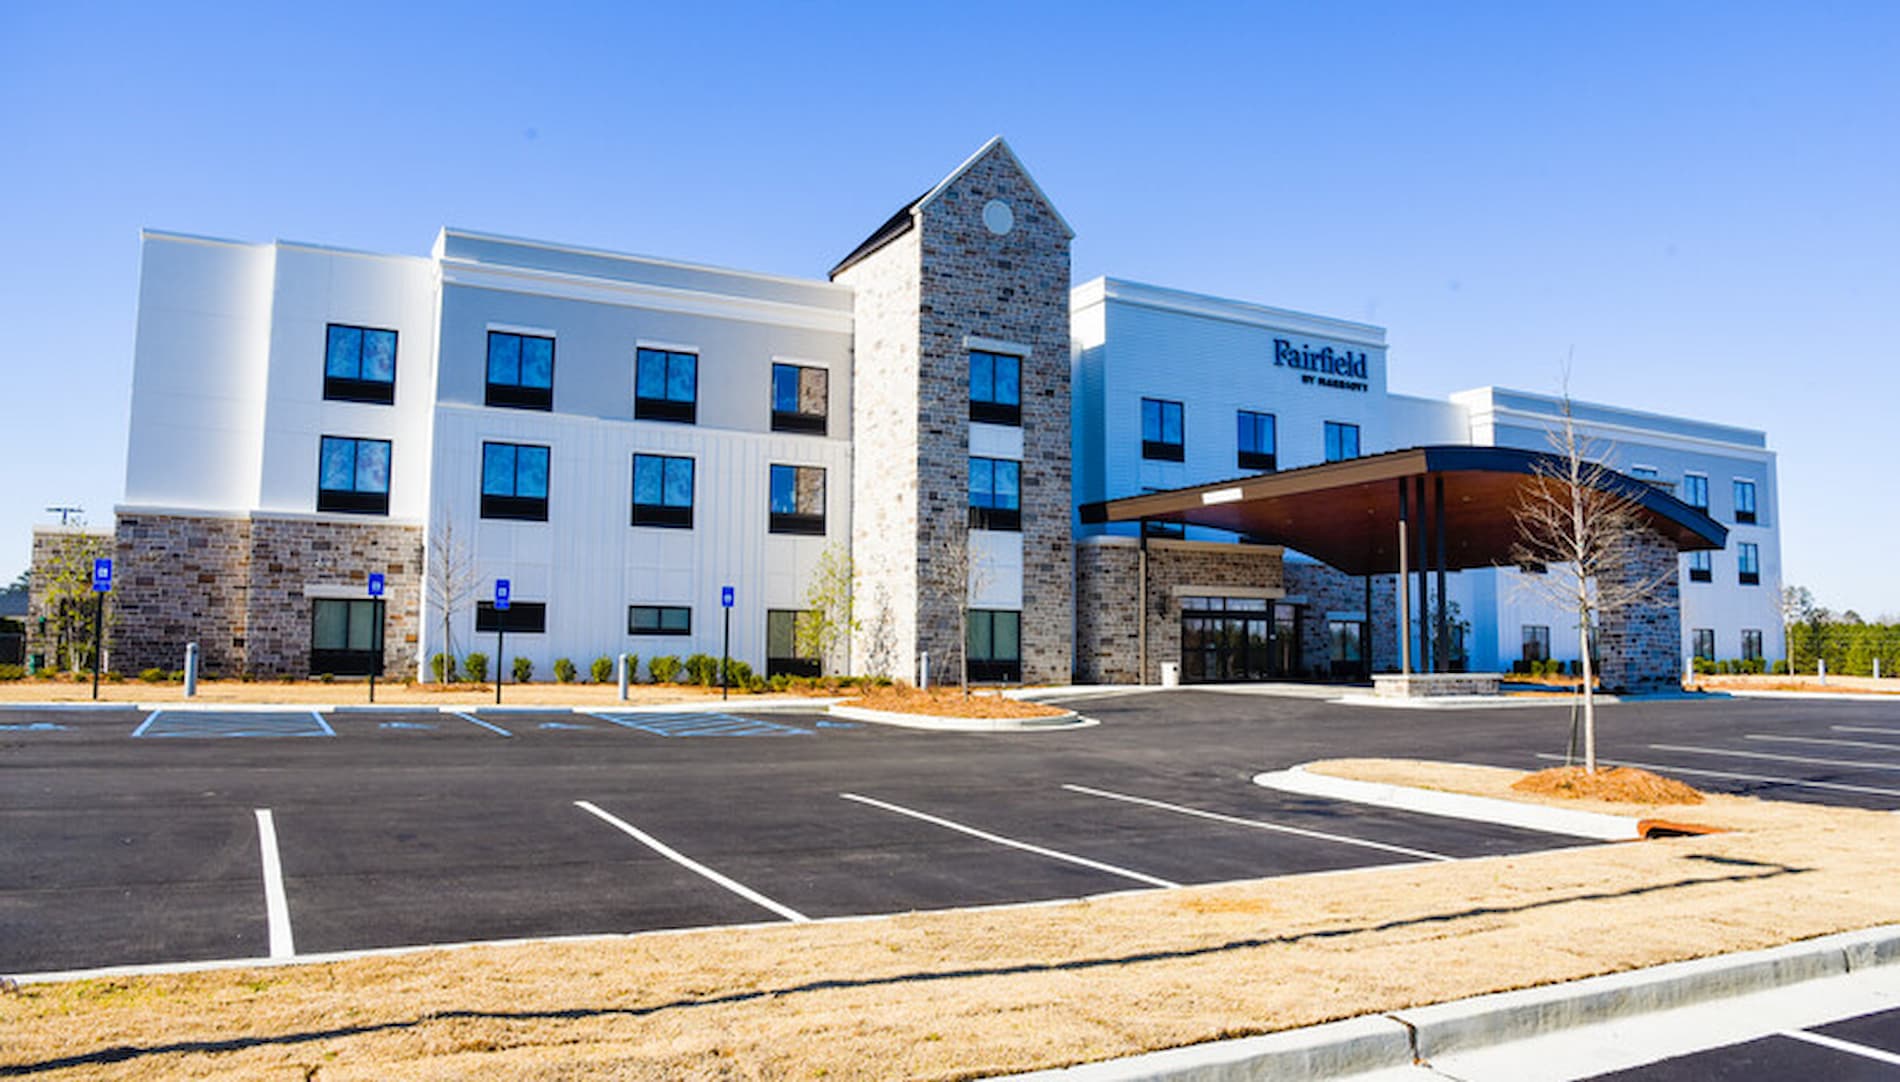 Berry College Fairfield Inn and Suites by Marriott